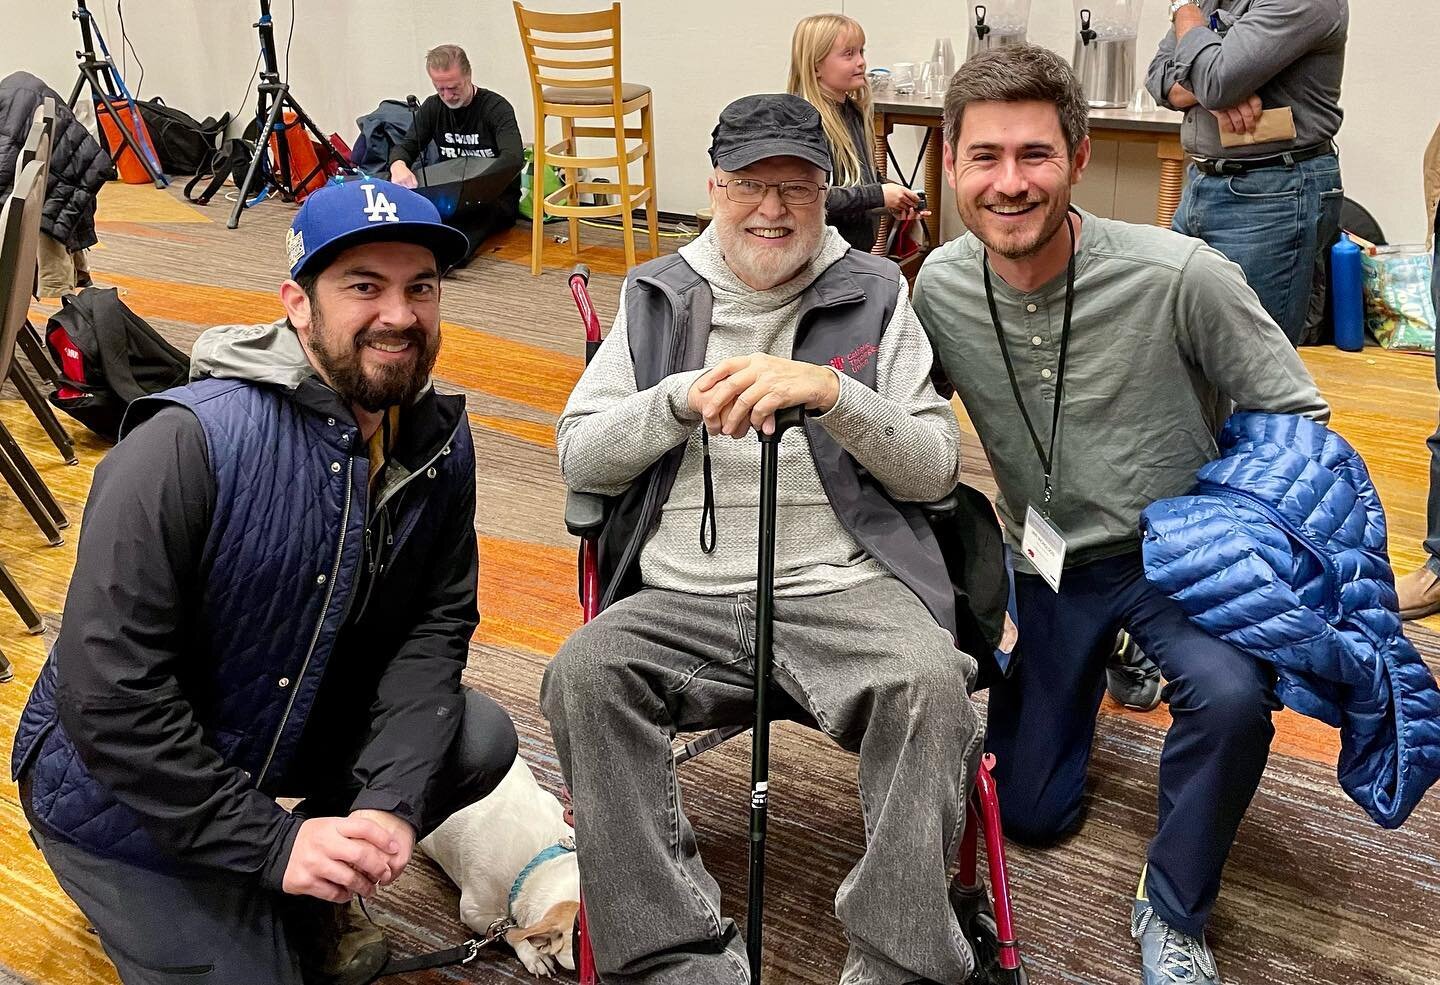 Men&rsquo;s healing - from one generation to another

#FlashbackFriday to the last night of Soularize 2022, where Fr. Richard Rohr blessed us with his presence and stories from his legacy in men&rsquo;s work; and a sneak preview of the documentary on